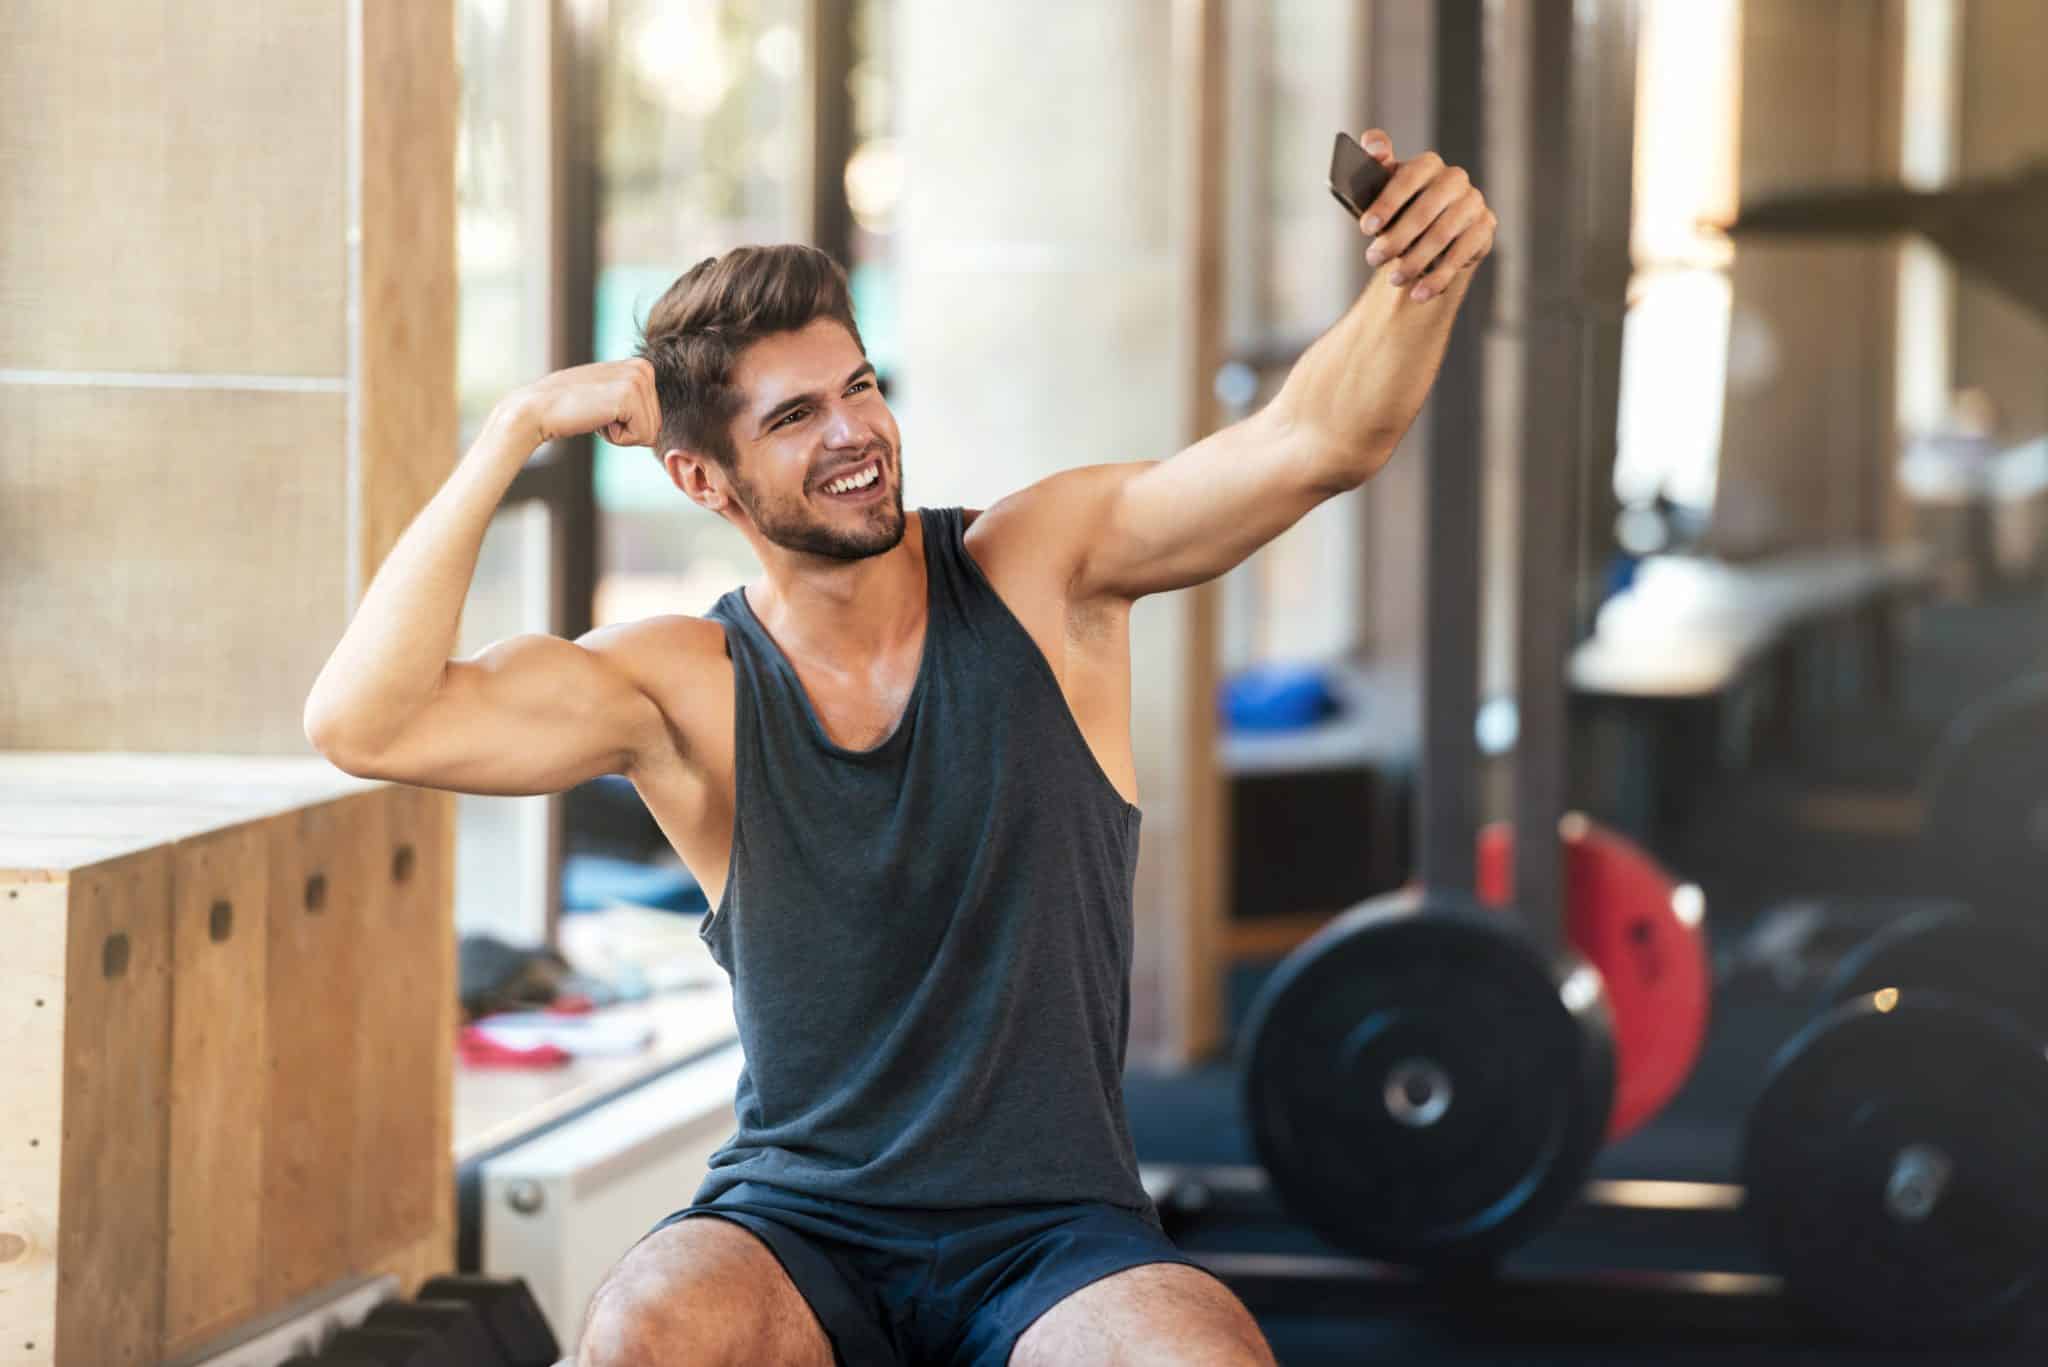 Georgia Residents Get Snap-Happy at the Gym: Study Finds Love for Selfies and Squats